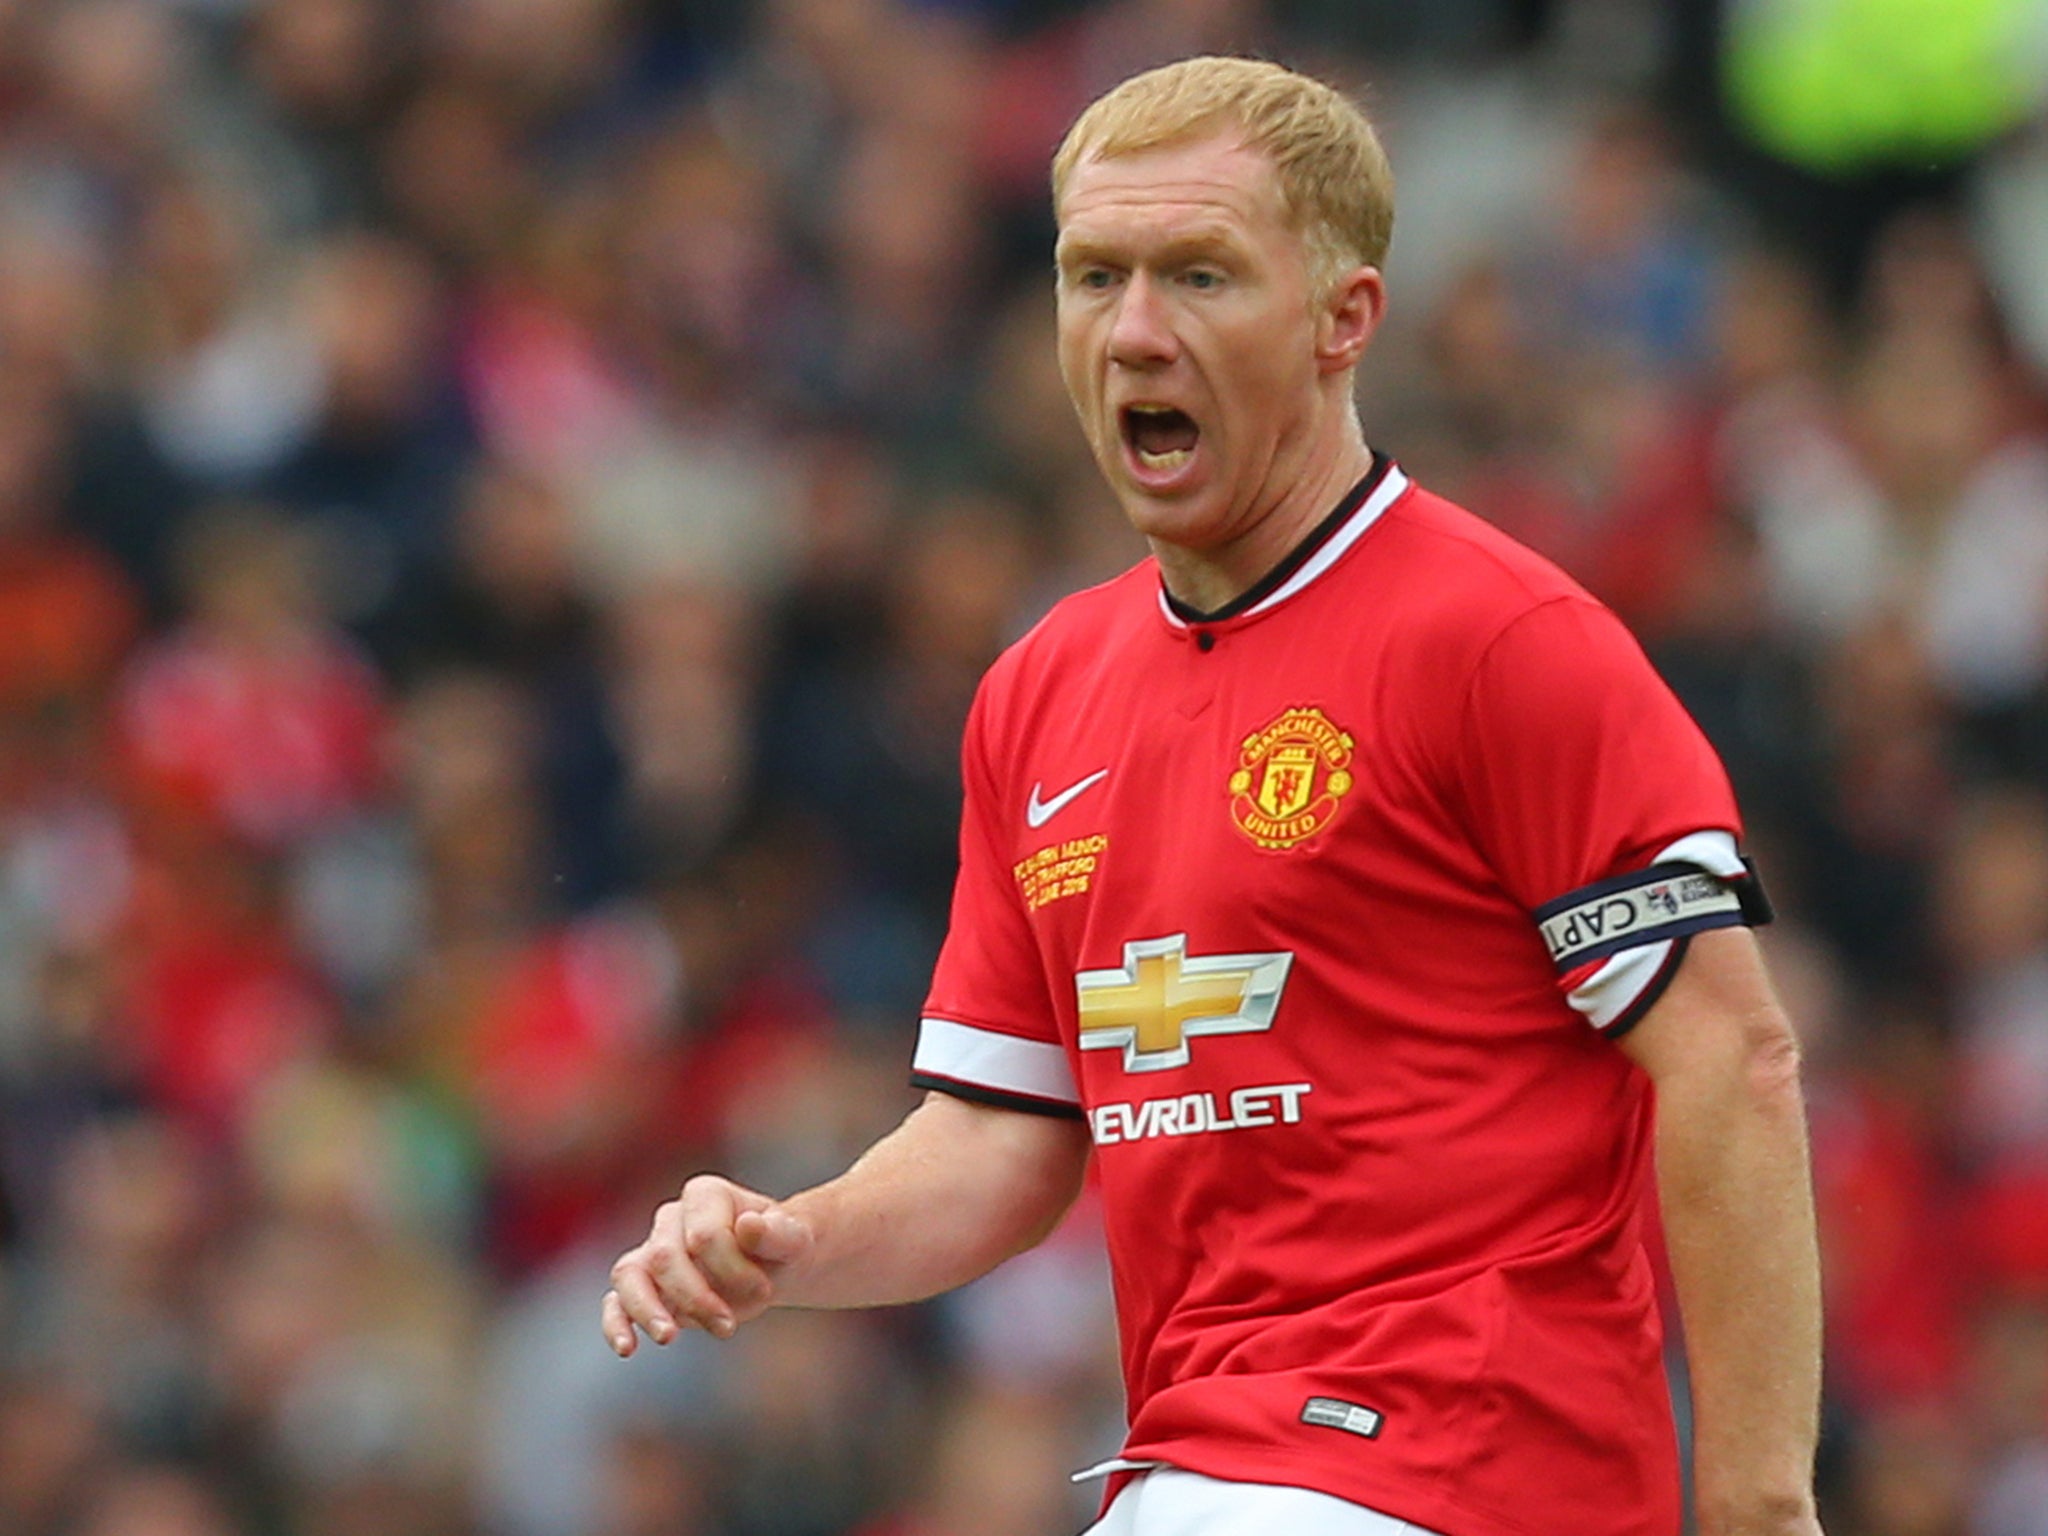 &#13;
"[Scholes] was just always on the same wavelength as you," explained Ryan Giggs (Getty Images)&#13;